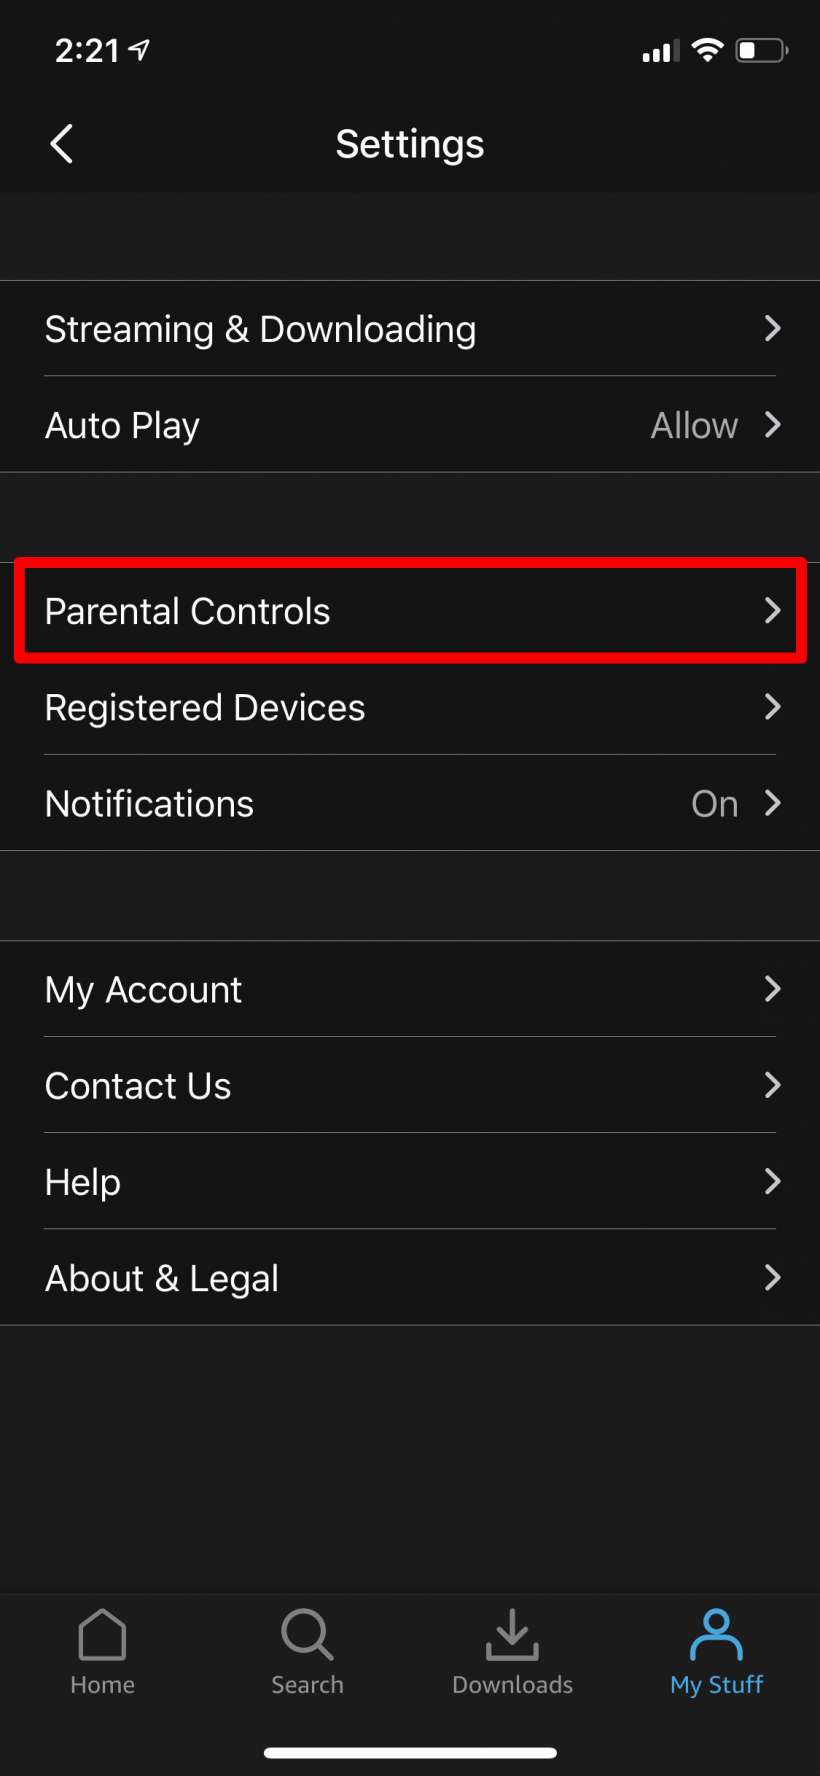 How to block adult or mature content on Amazon Prime Video on iPhone and iPad.